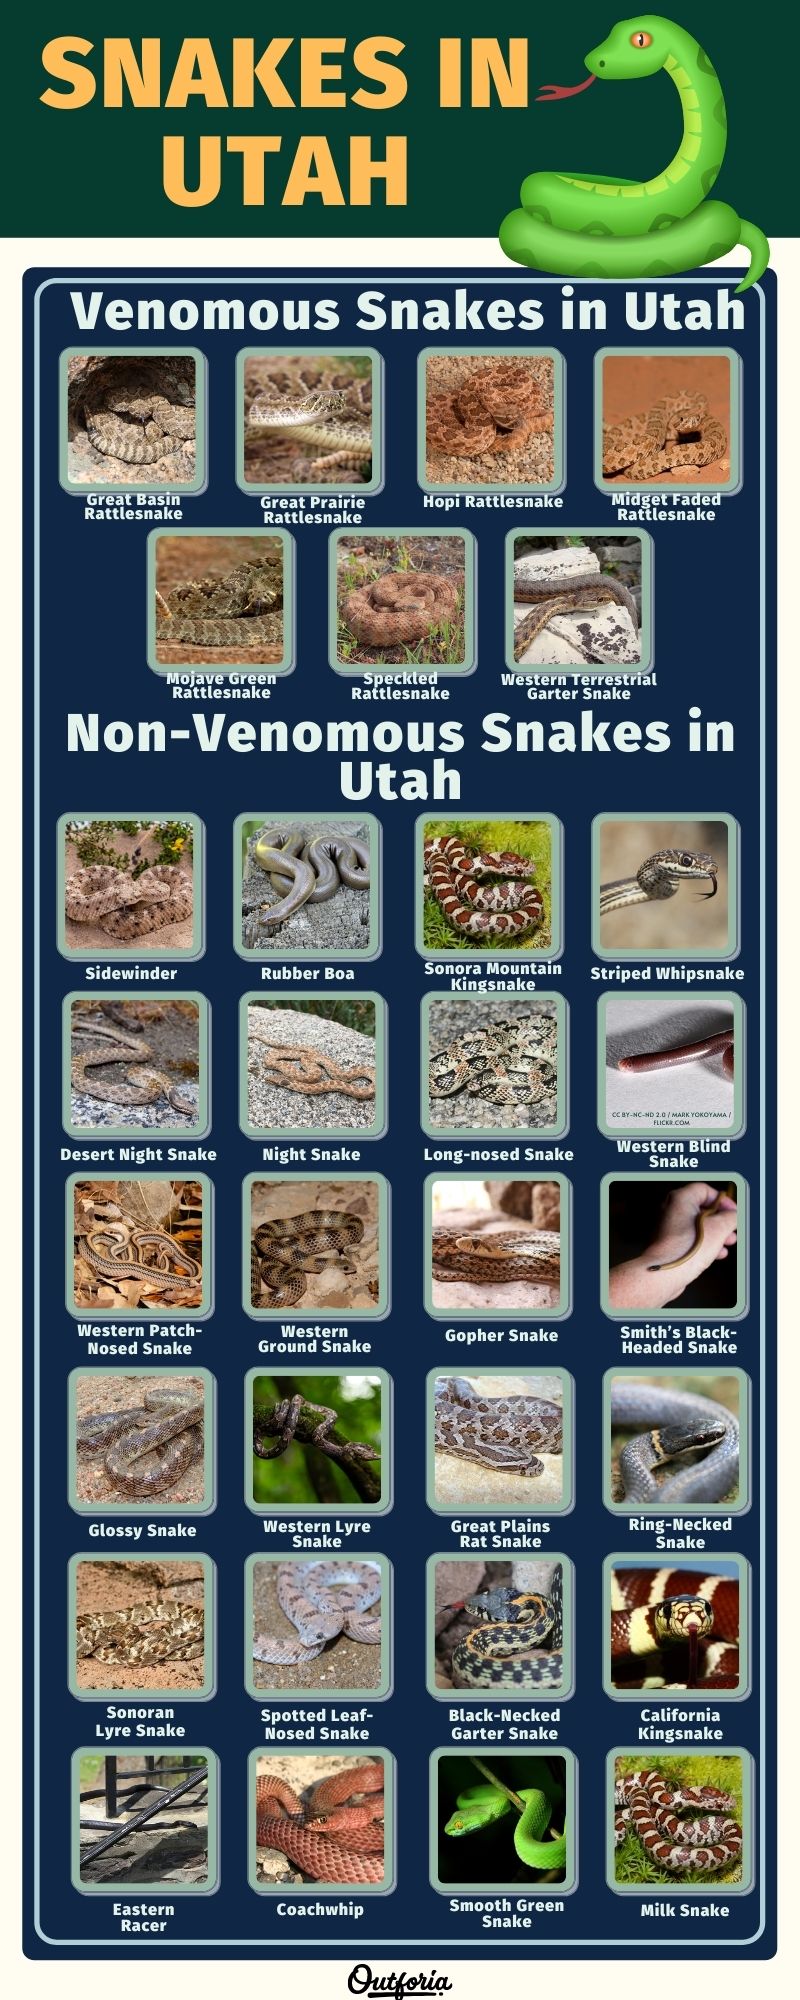 Chart of Snakes in Utah complete with photos, descriptions, and more